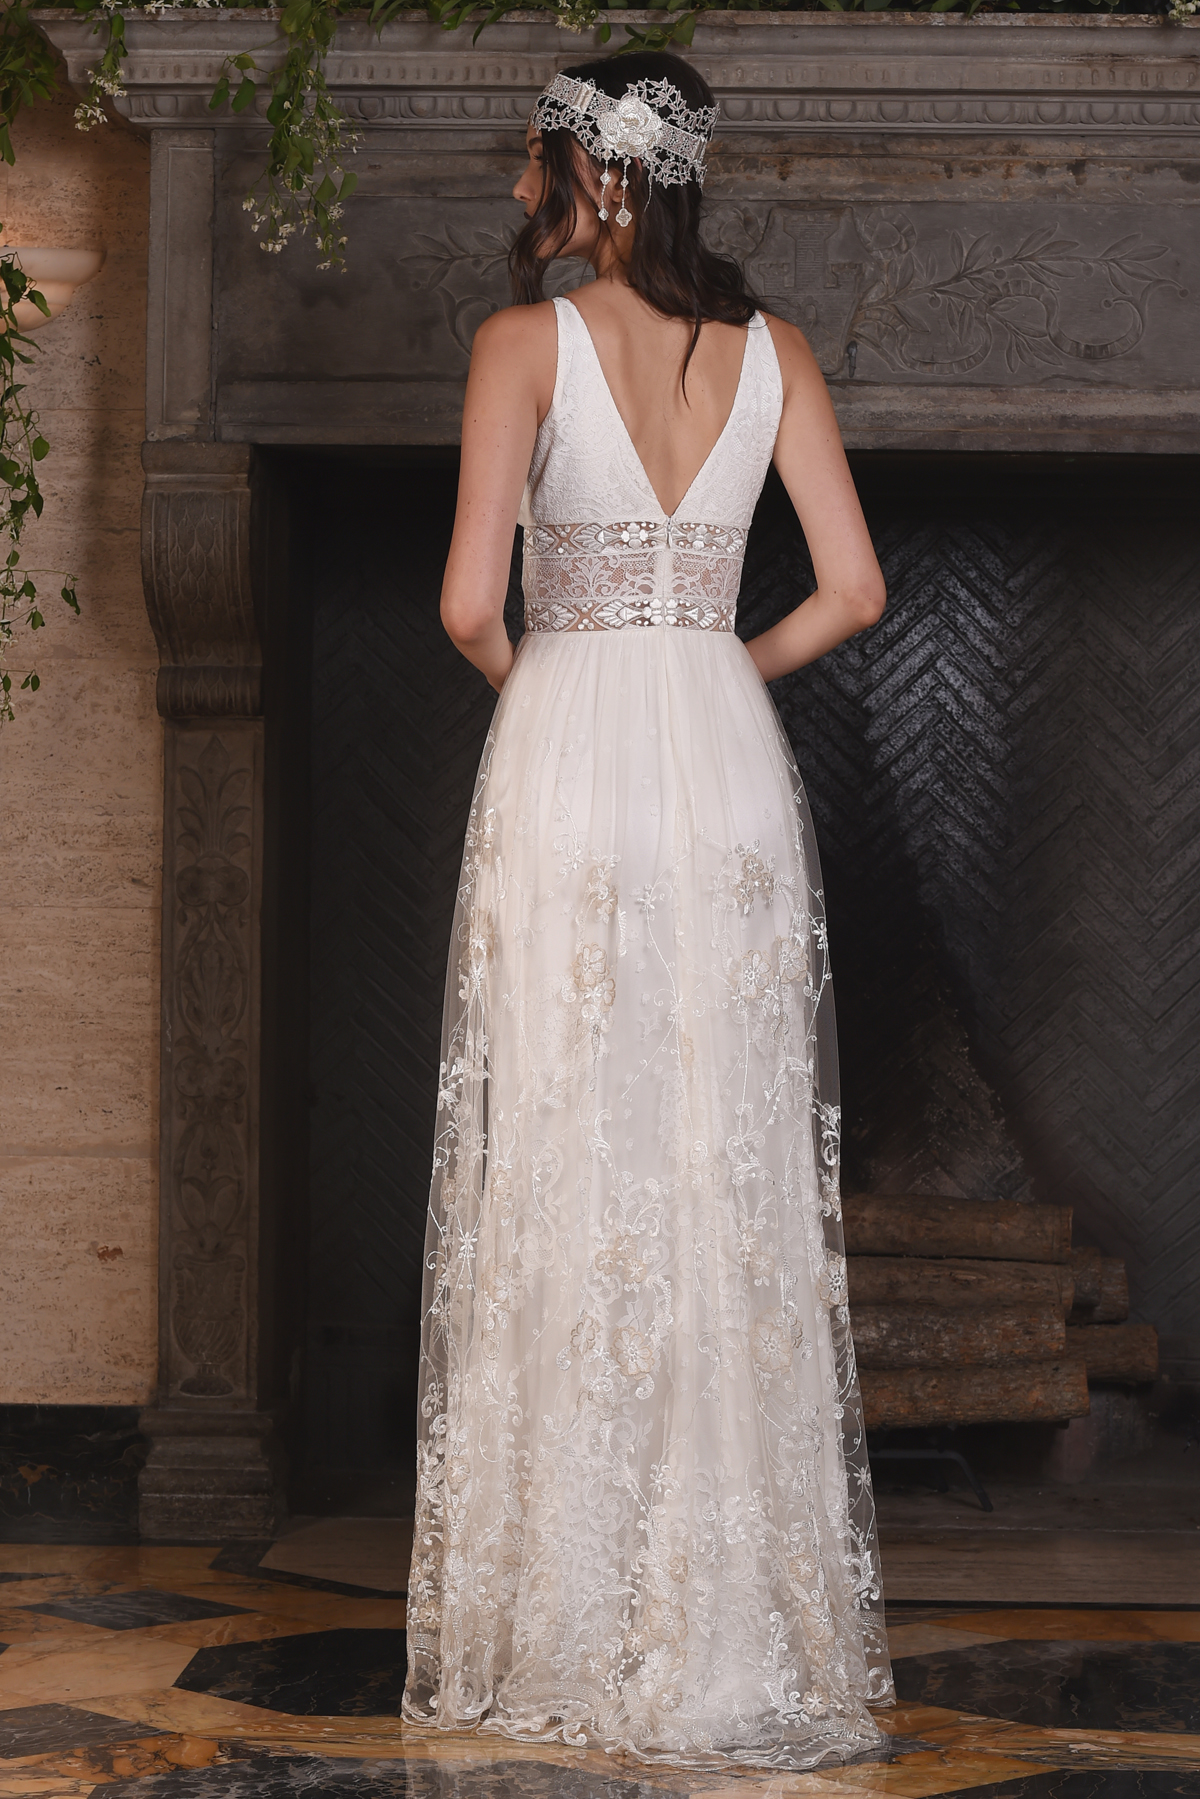 The Nightingale gown, from Claire Pettibone's 'The Four Seasons' bridal couture collection for 2017.